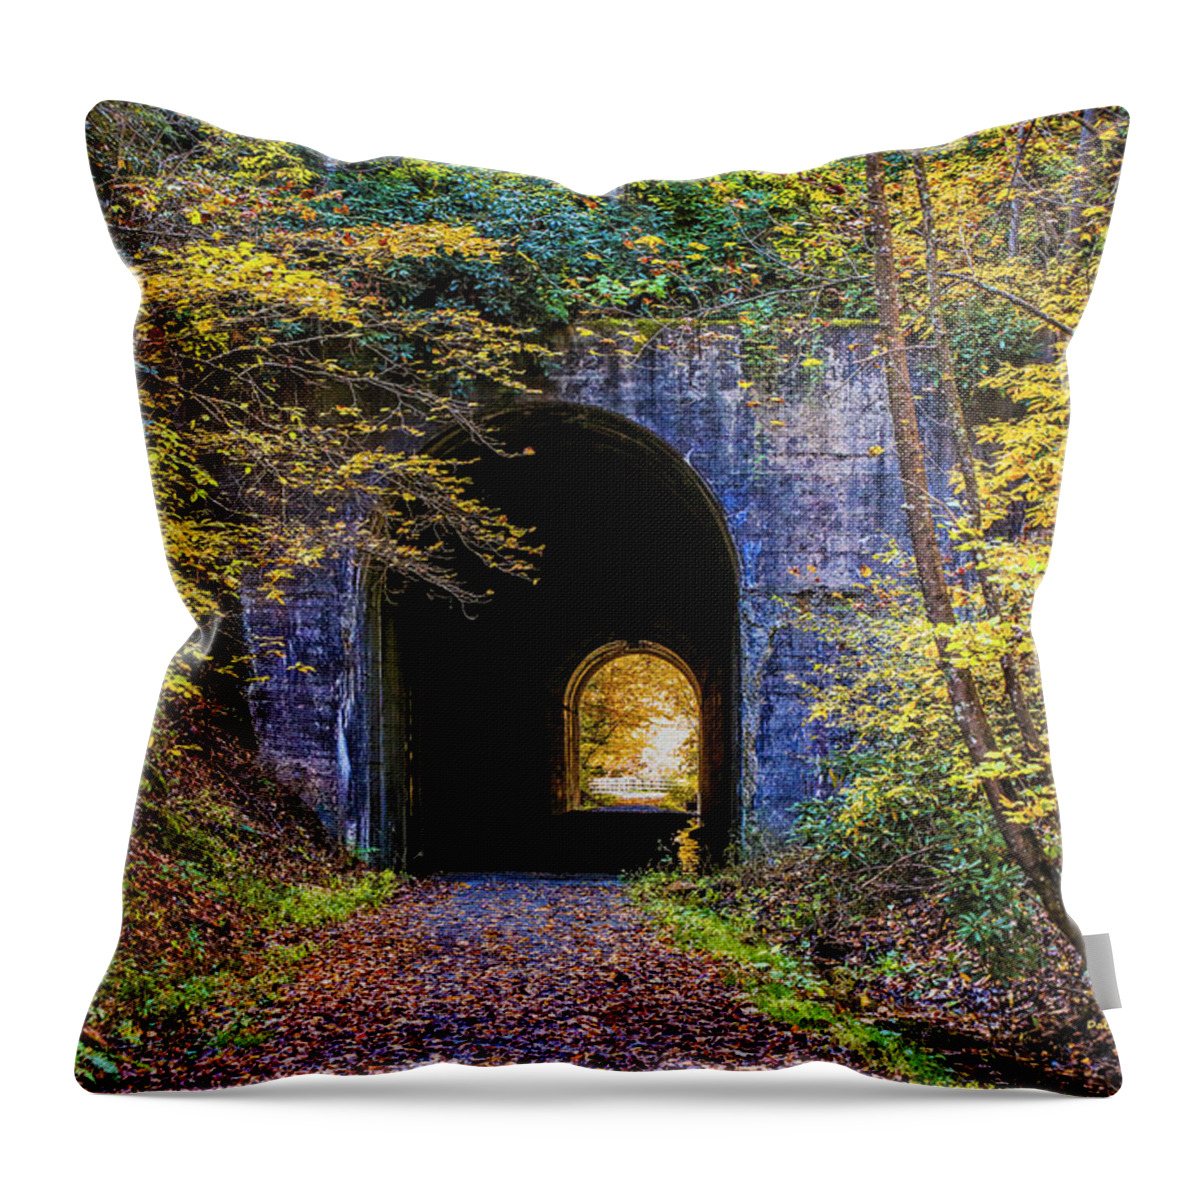 Tunnel Throw Pillow featuring the photograph Guest River Gorge Tunnel by Dale R Carlson